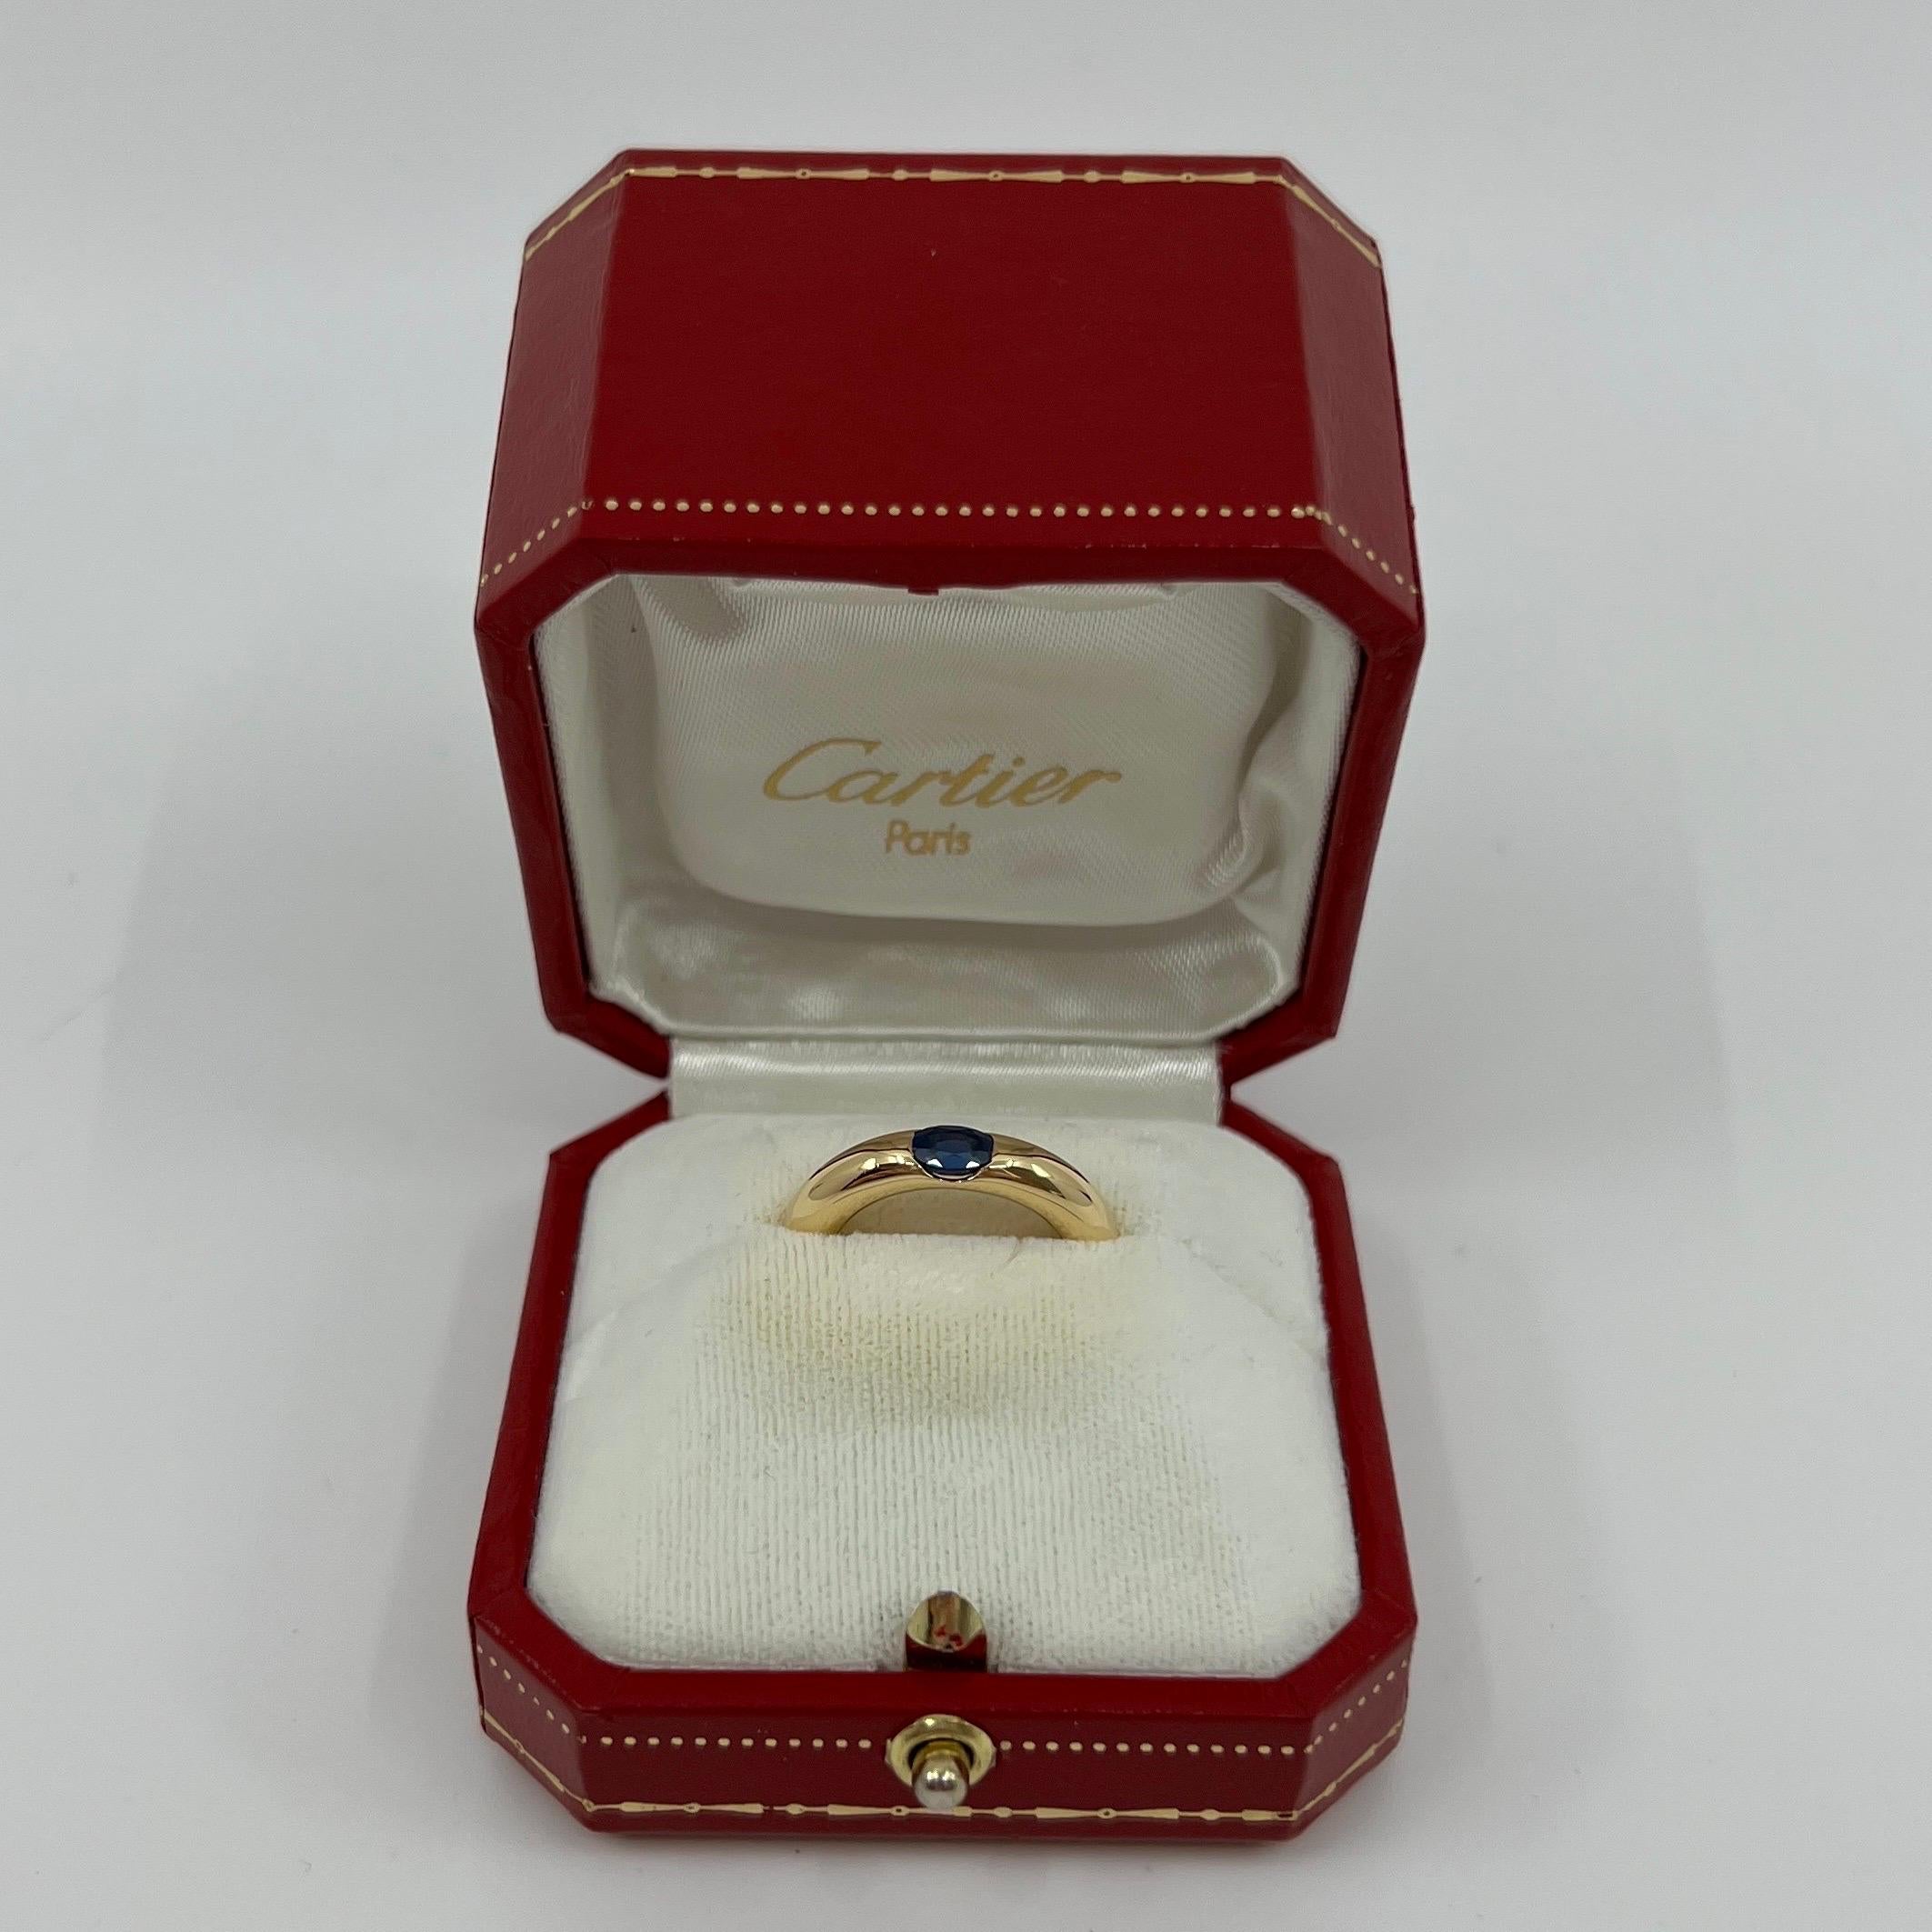 Vintage Cartier Vivid Blue Sapphire 18k Yellow Gold Solitaire Ring.

Stunning yellow gold ring set with a fine vivid blue sapphire. Fine jewellery houses like Cartier only use the finest of gemstones and this sapphire is no exception. 
An excellent